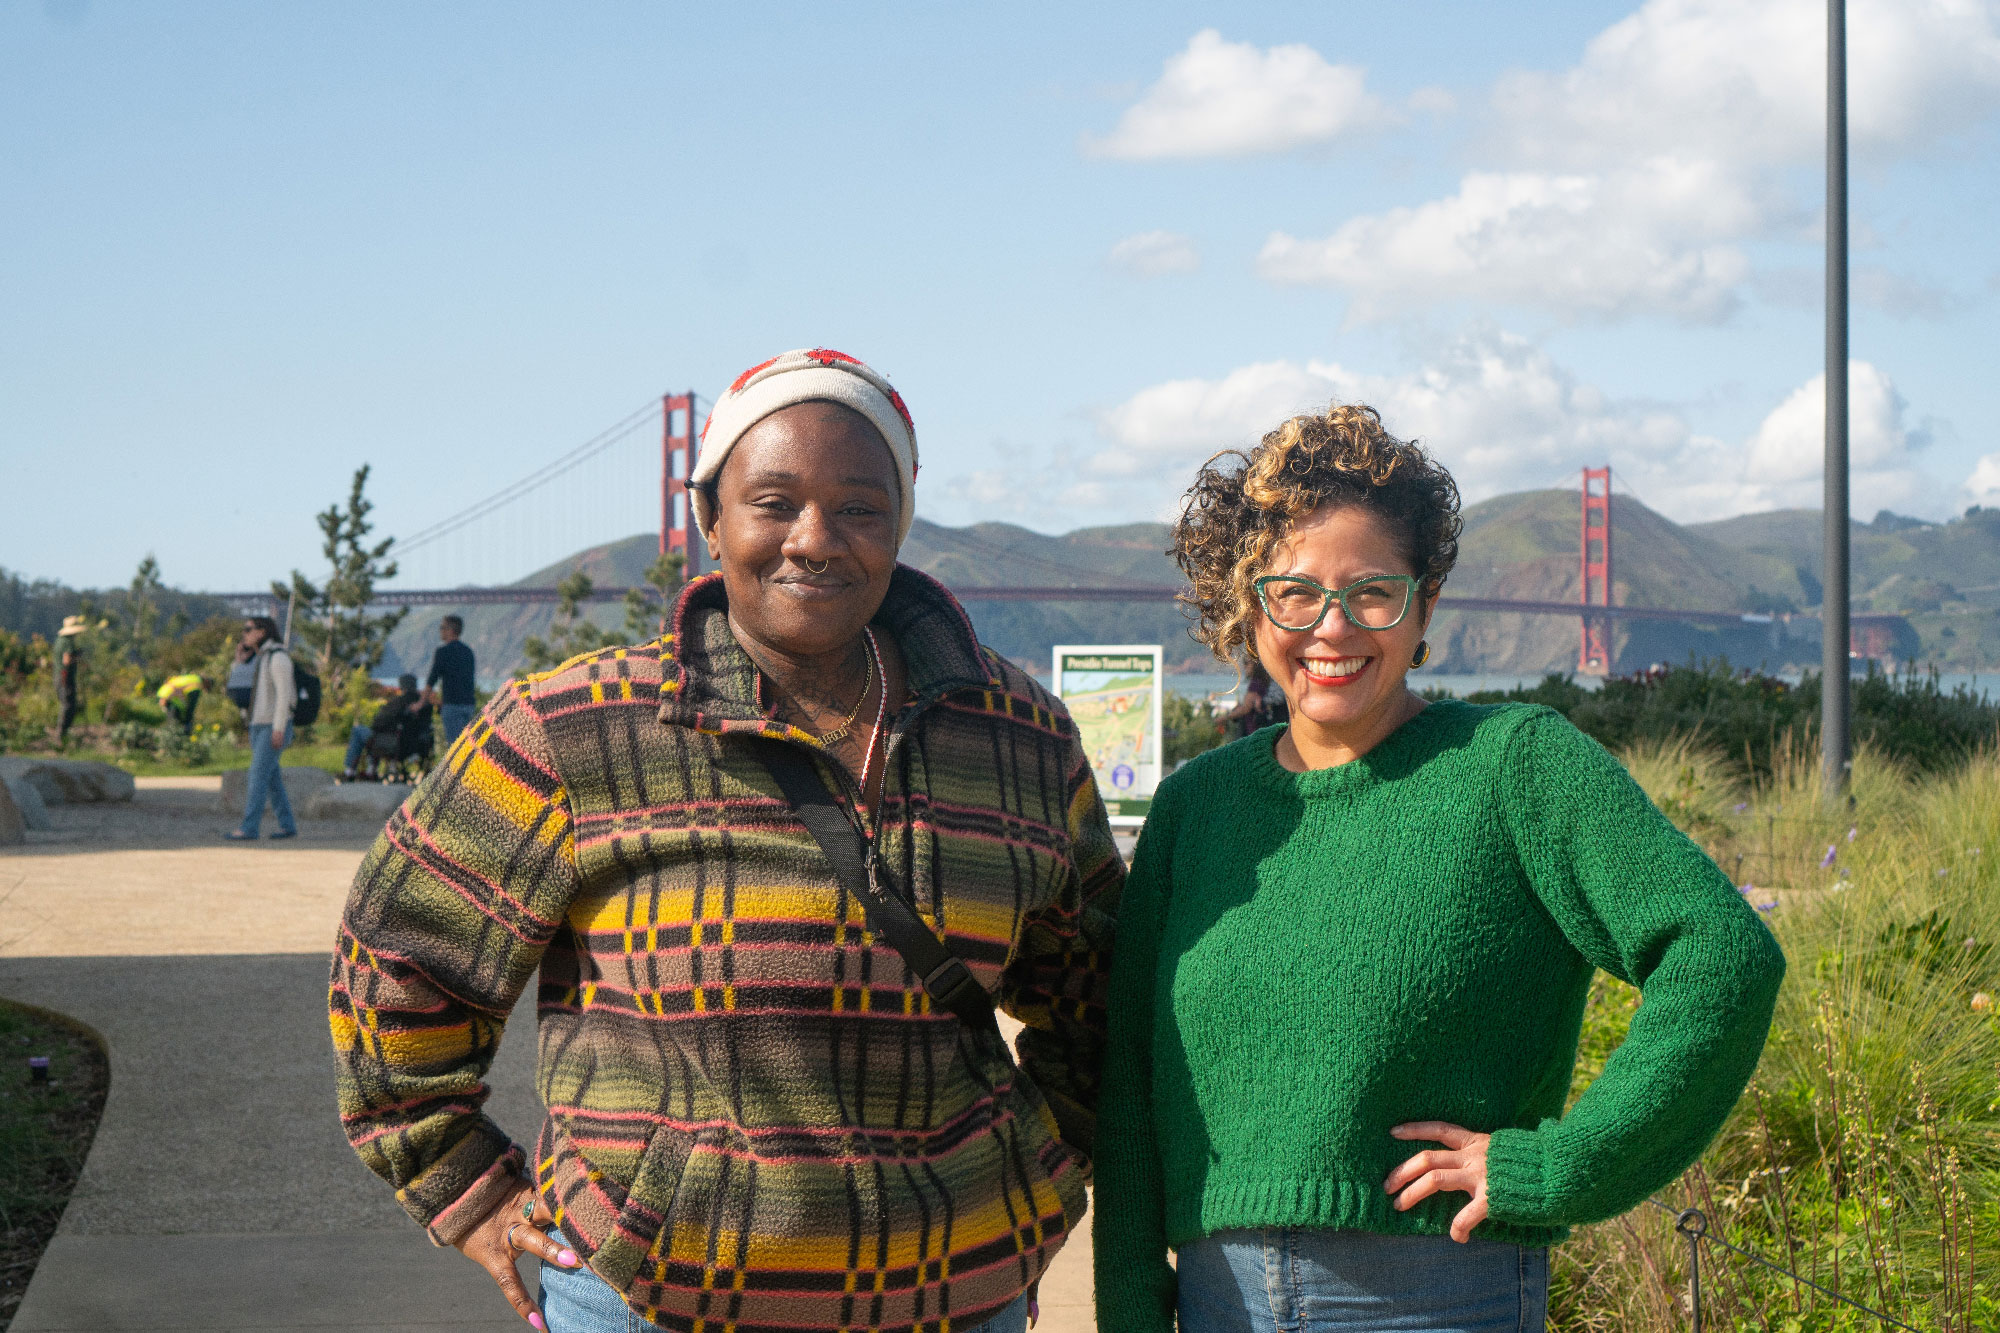 Two people pose smiling with Golden Gate Bride in background